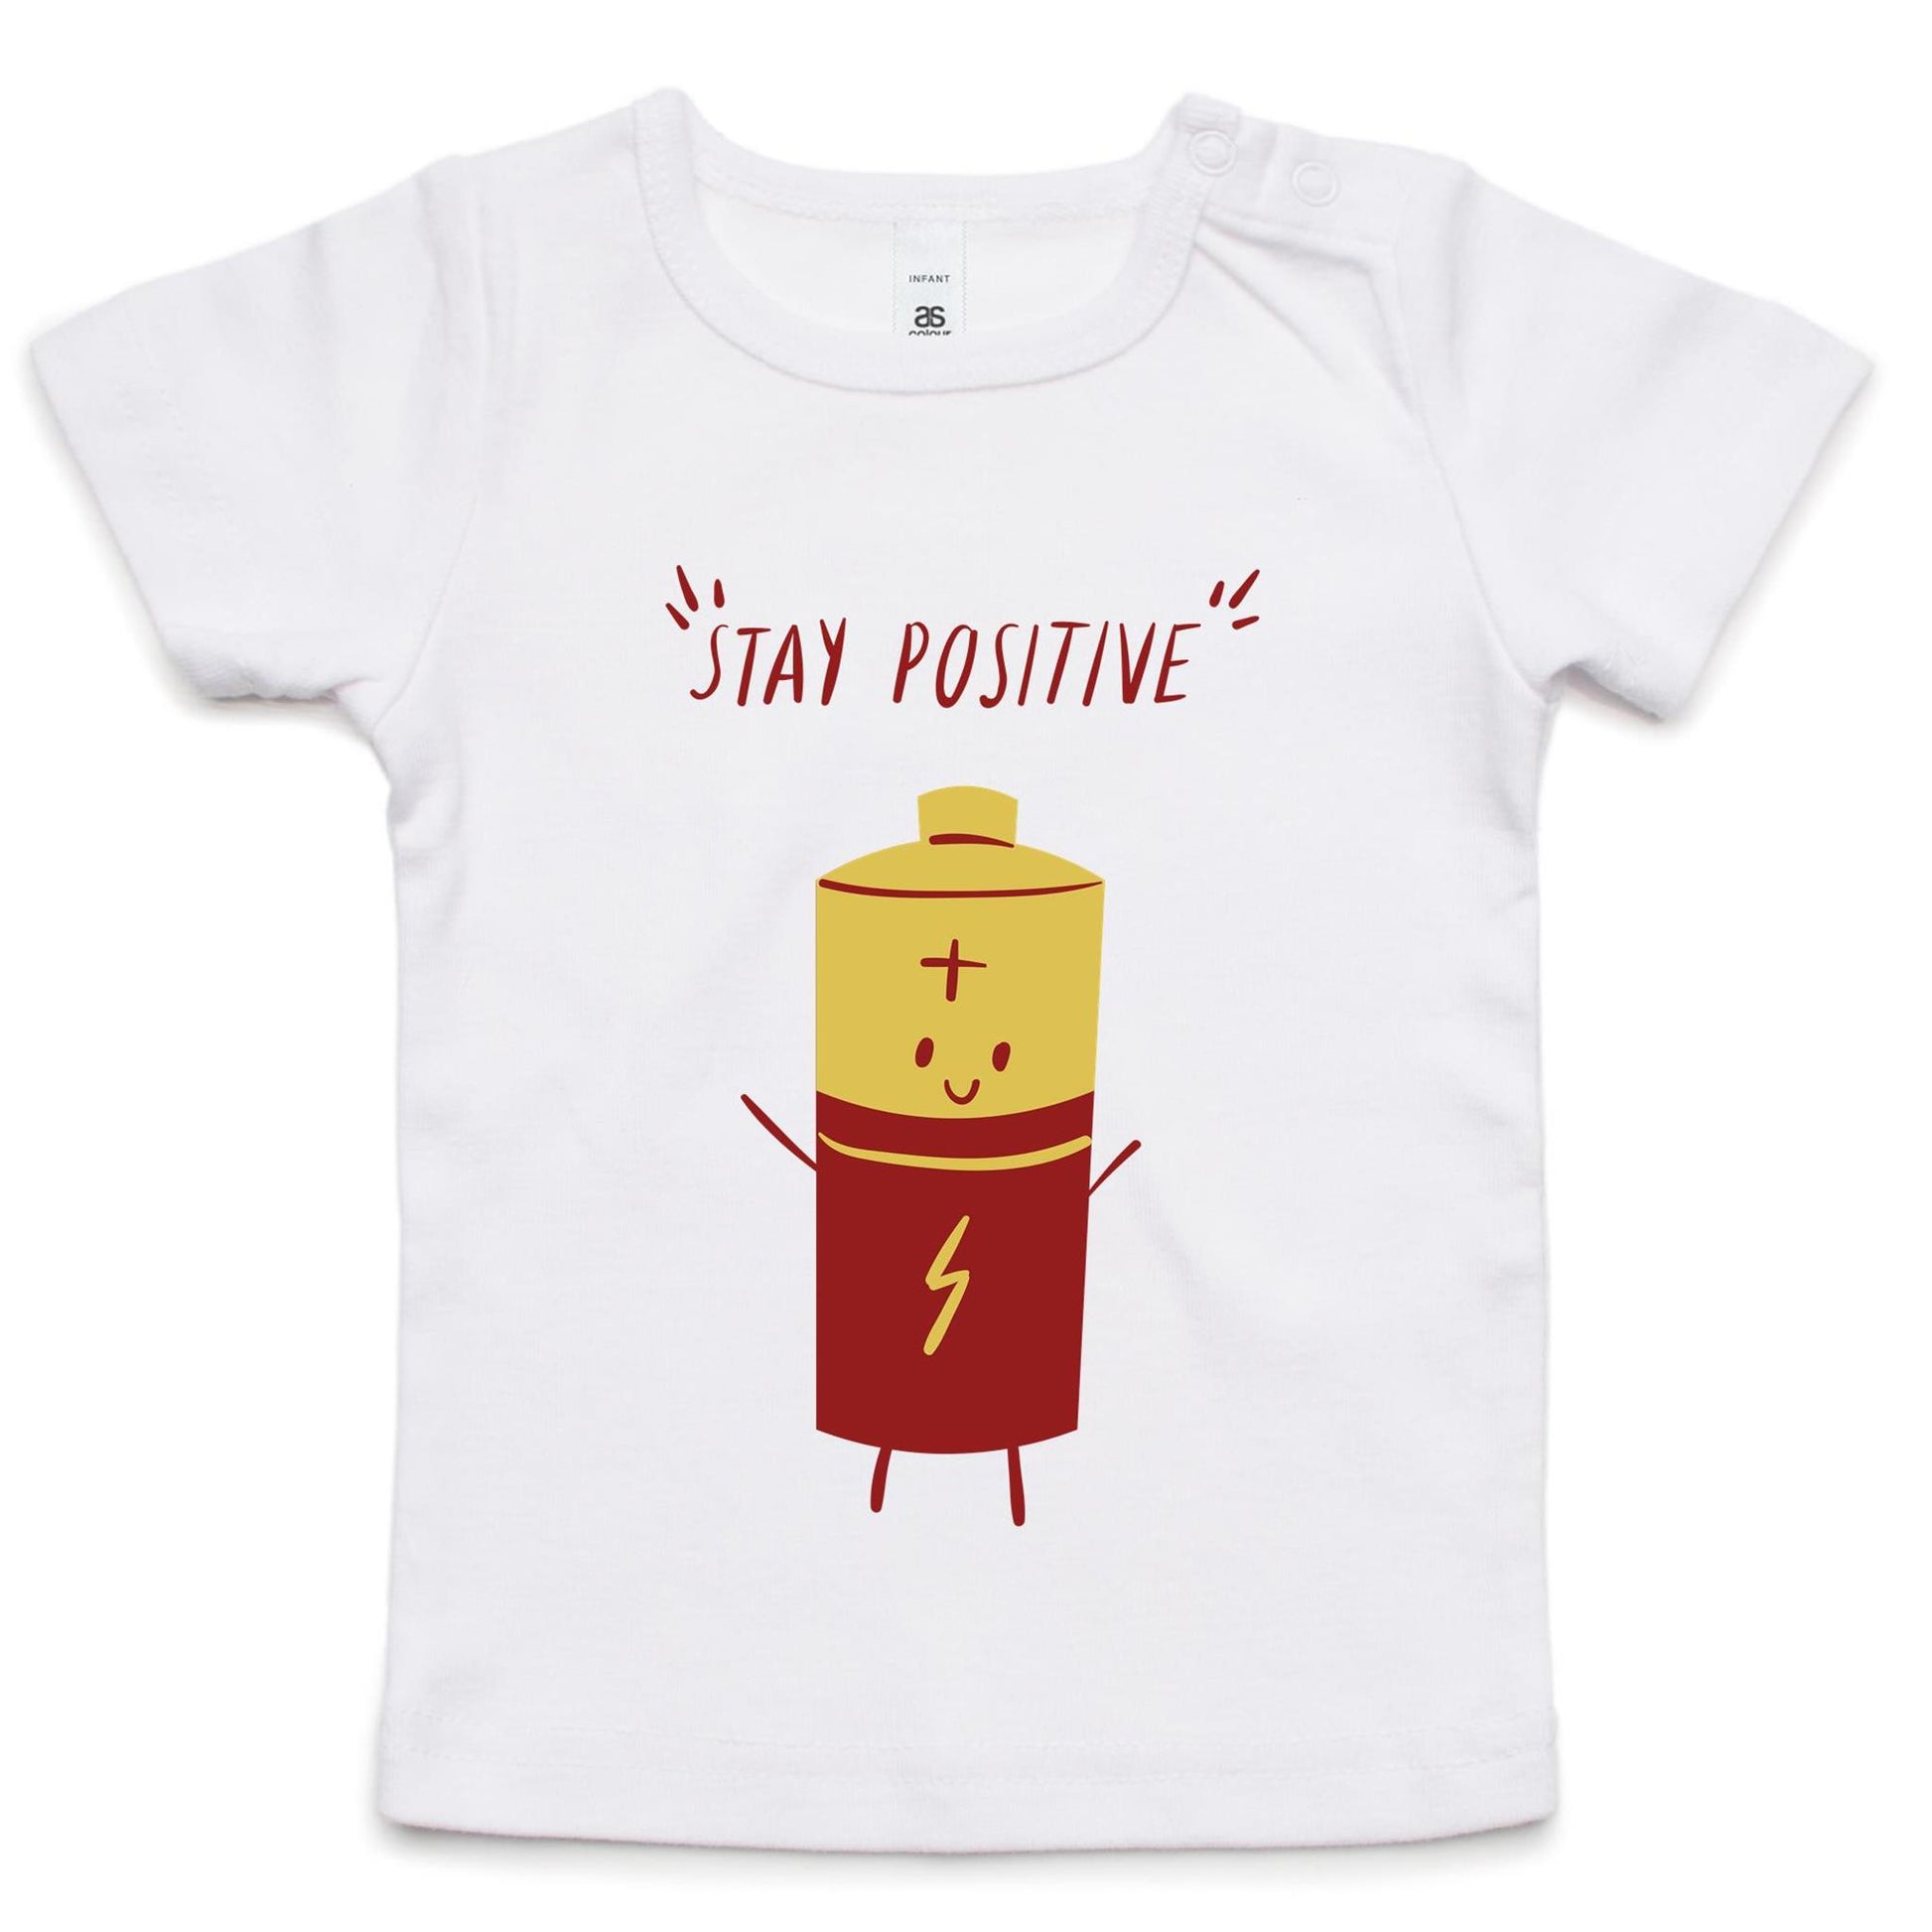 Stay Positive - Baby T-shirt White Baby T-shirt kids